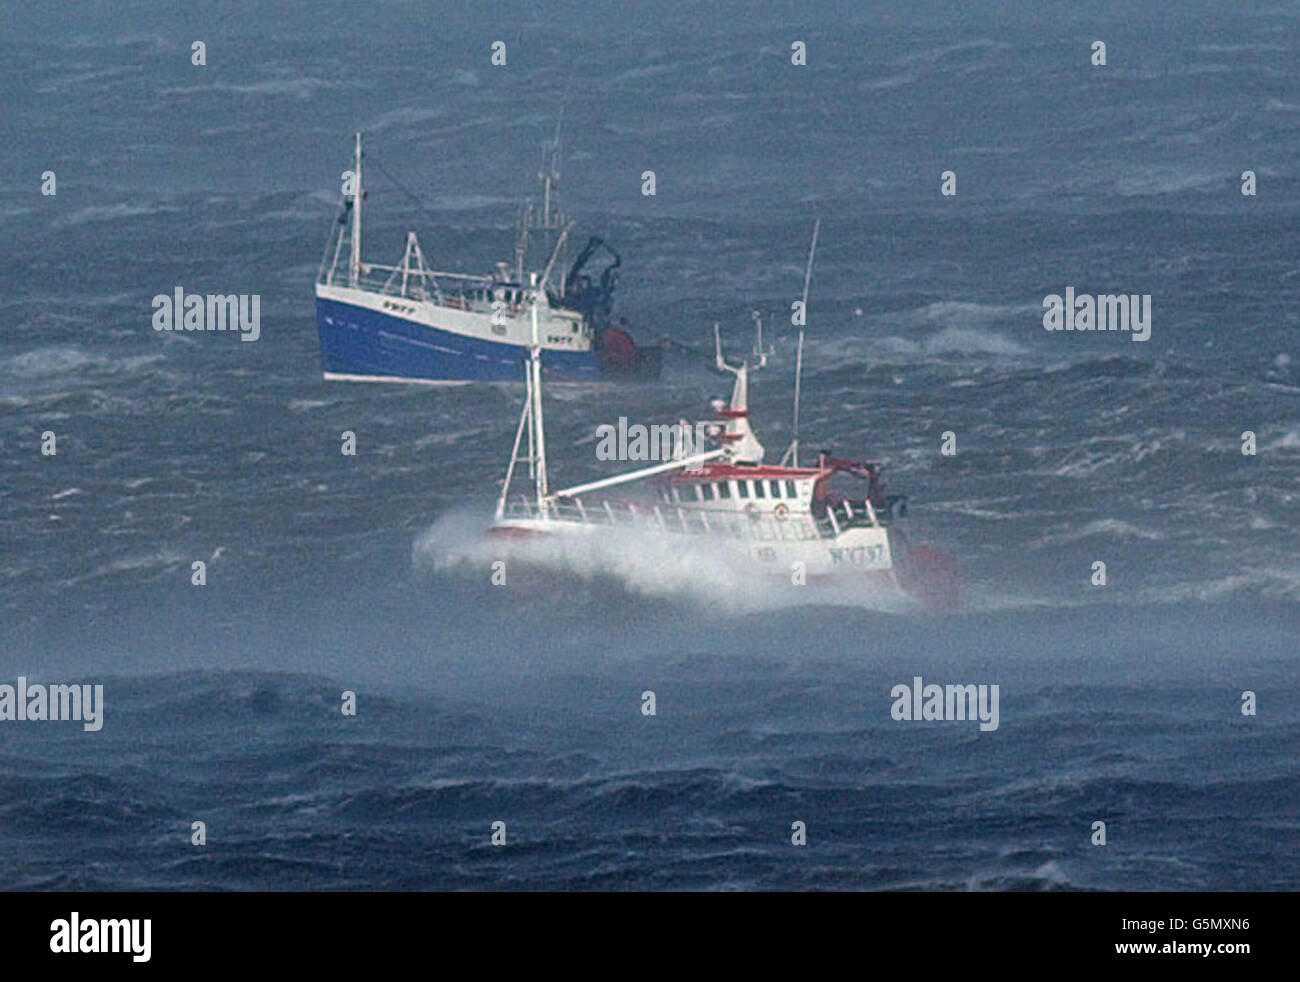 Heading for safe harbour, fishing boats plough through gale force winds for the safety of the port of Whitby on the Yorkshire coast, as severe storms battered Britain. * Elsewhere, around 10,000 customers lost their electricity after gusts up to 90mph damaged power lines in Scotland. 16/08/02 : Those who go down to sea in ships have the most dangerous jobs in the country, it was revealed. A study found that even in 2002 merchant seamen and trawler fishermen were still far more likely to die in accidents than other workers. Fishermen were 50 times more likely to have a fatal work accident and Stock Photo